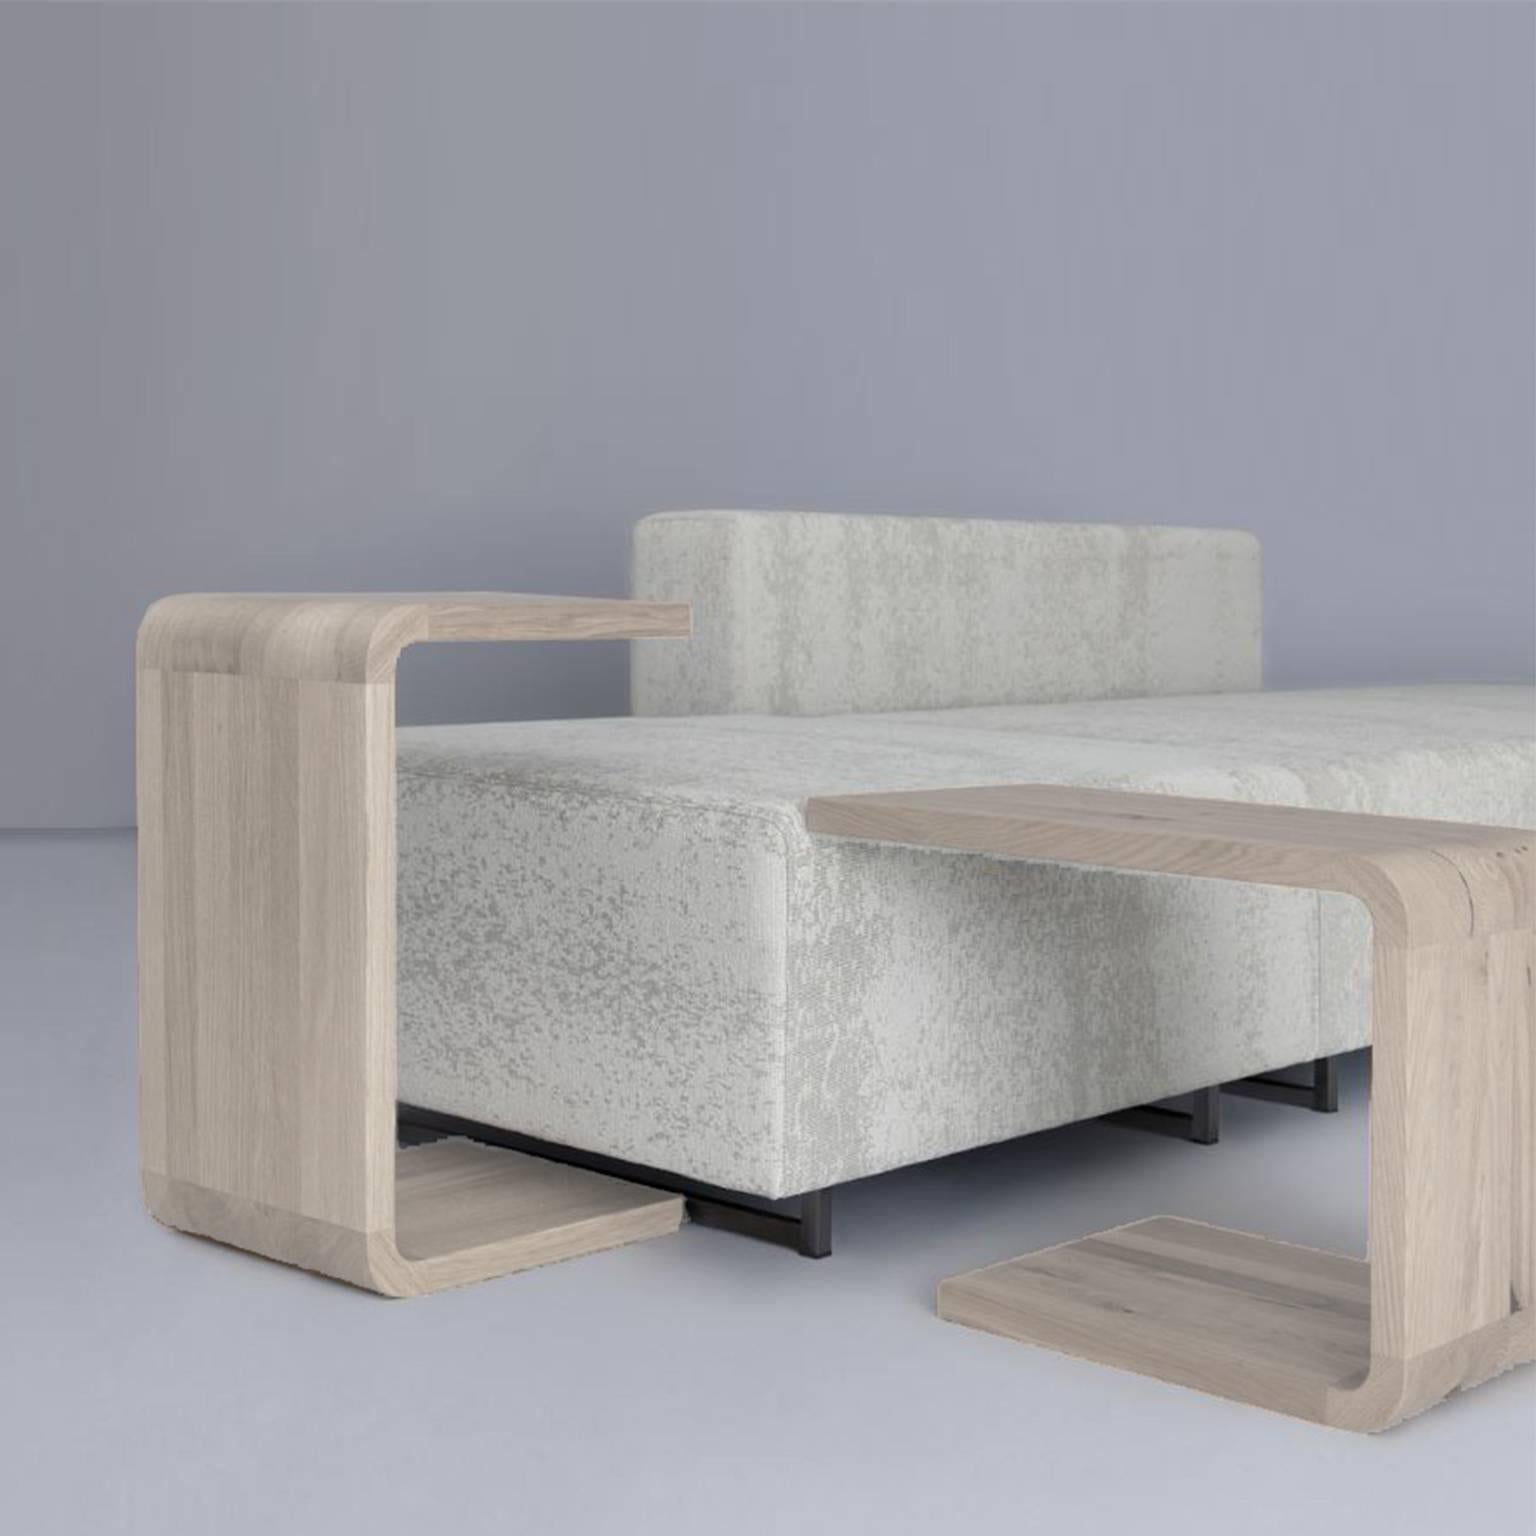 Set of x2 nesting side tables available from showroom display in solid oak stained chalk white from sample display. These tables nest neatly within each other creating an interesting composition, though can be easily placed over sofa armrests or